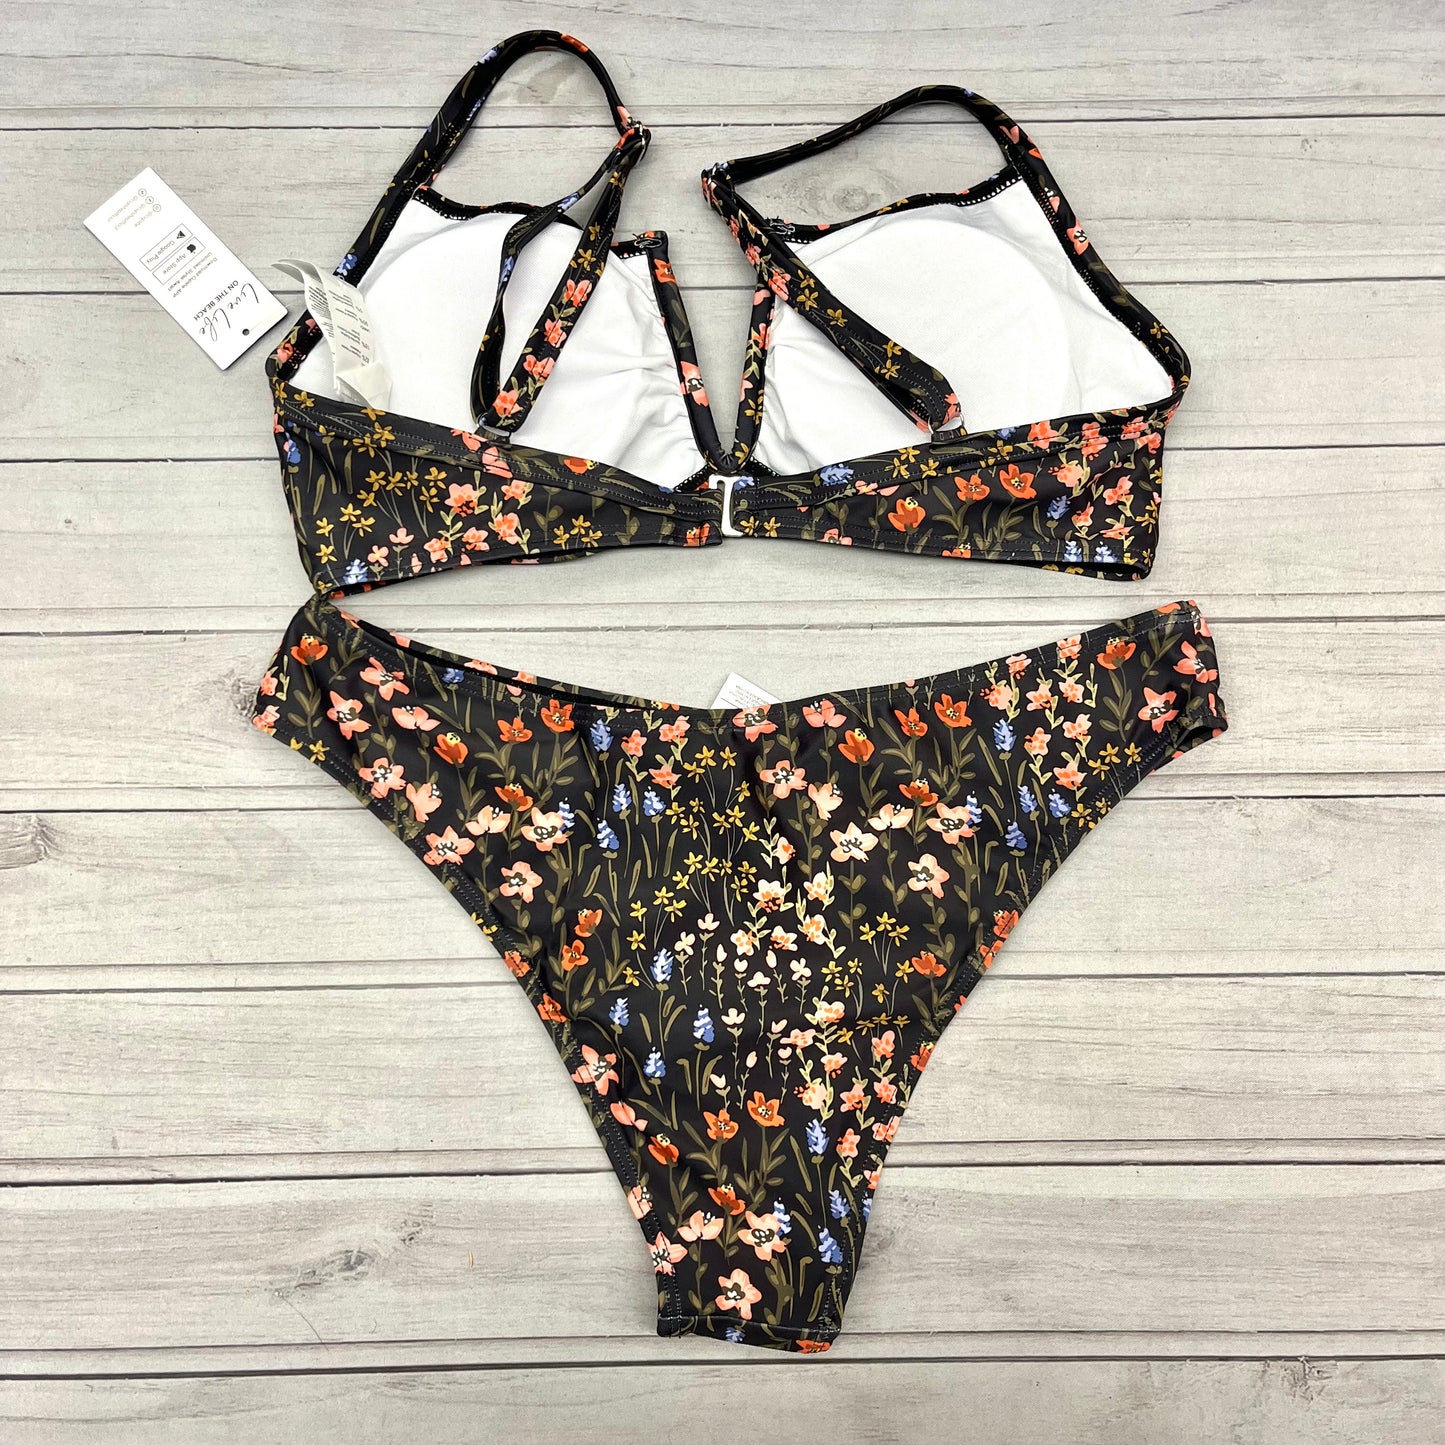 Swimsuit 2pc By Cupshe  Size: M